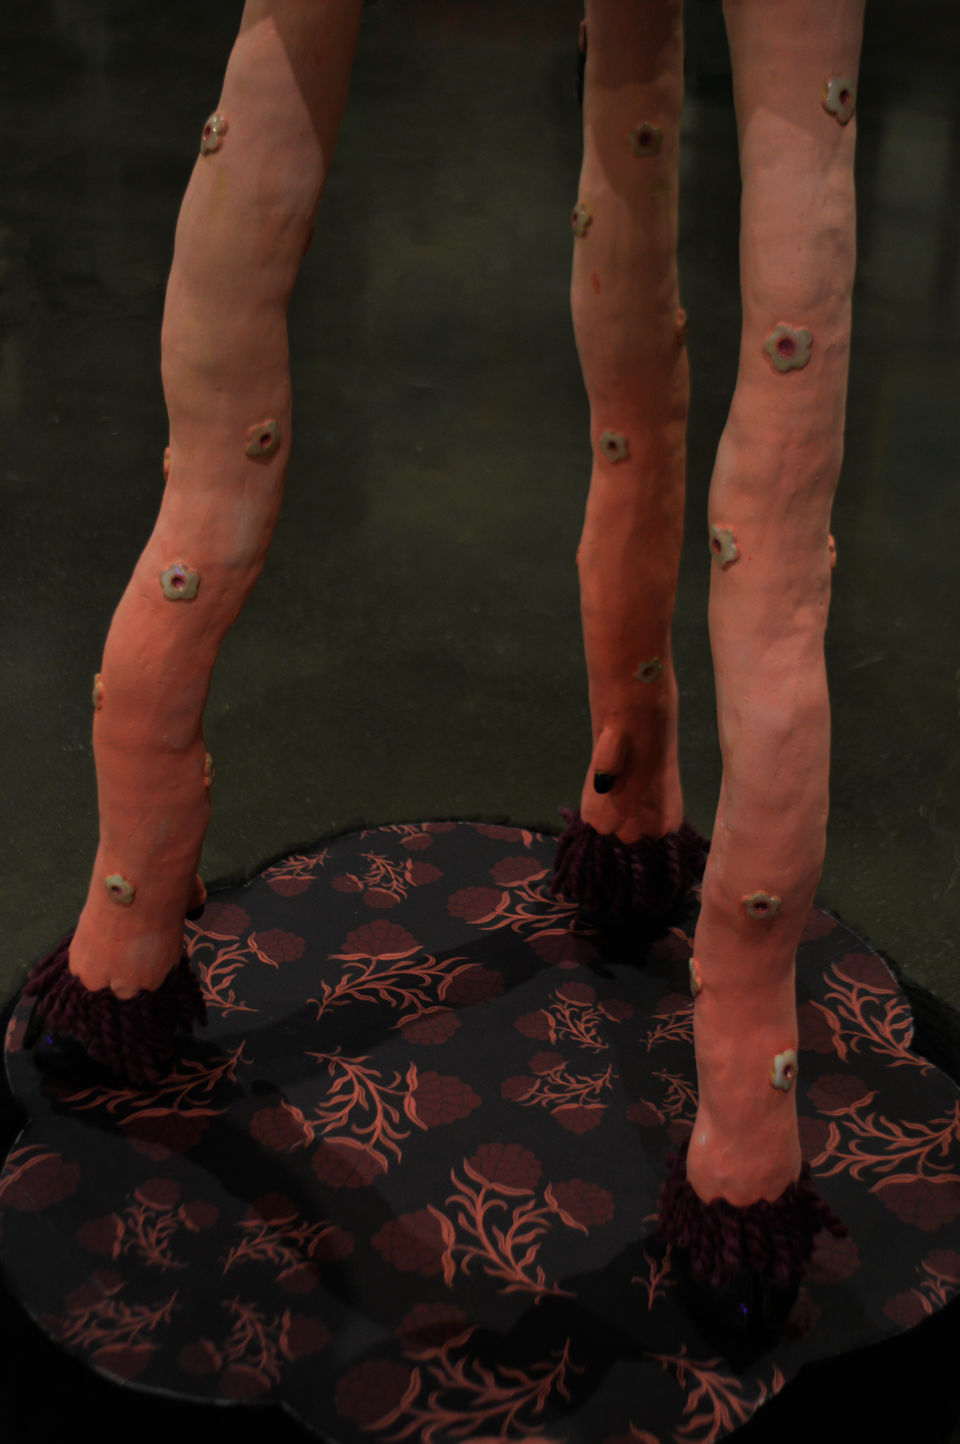 Wavy pink ceramic table legs with hooves.